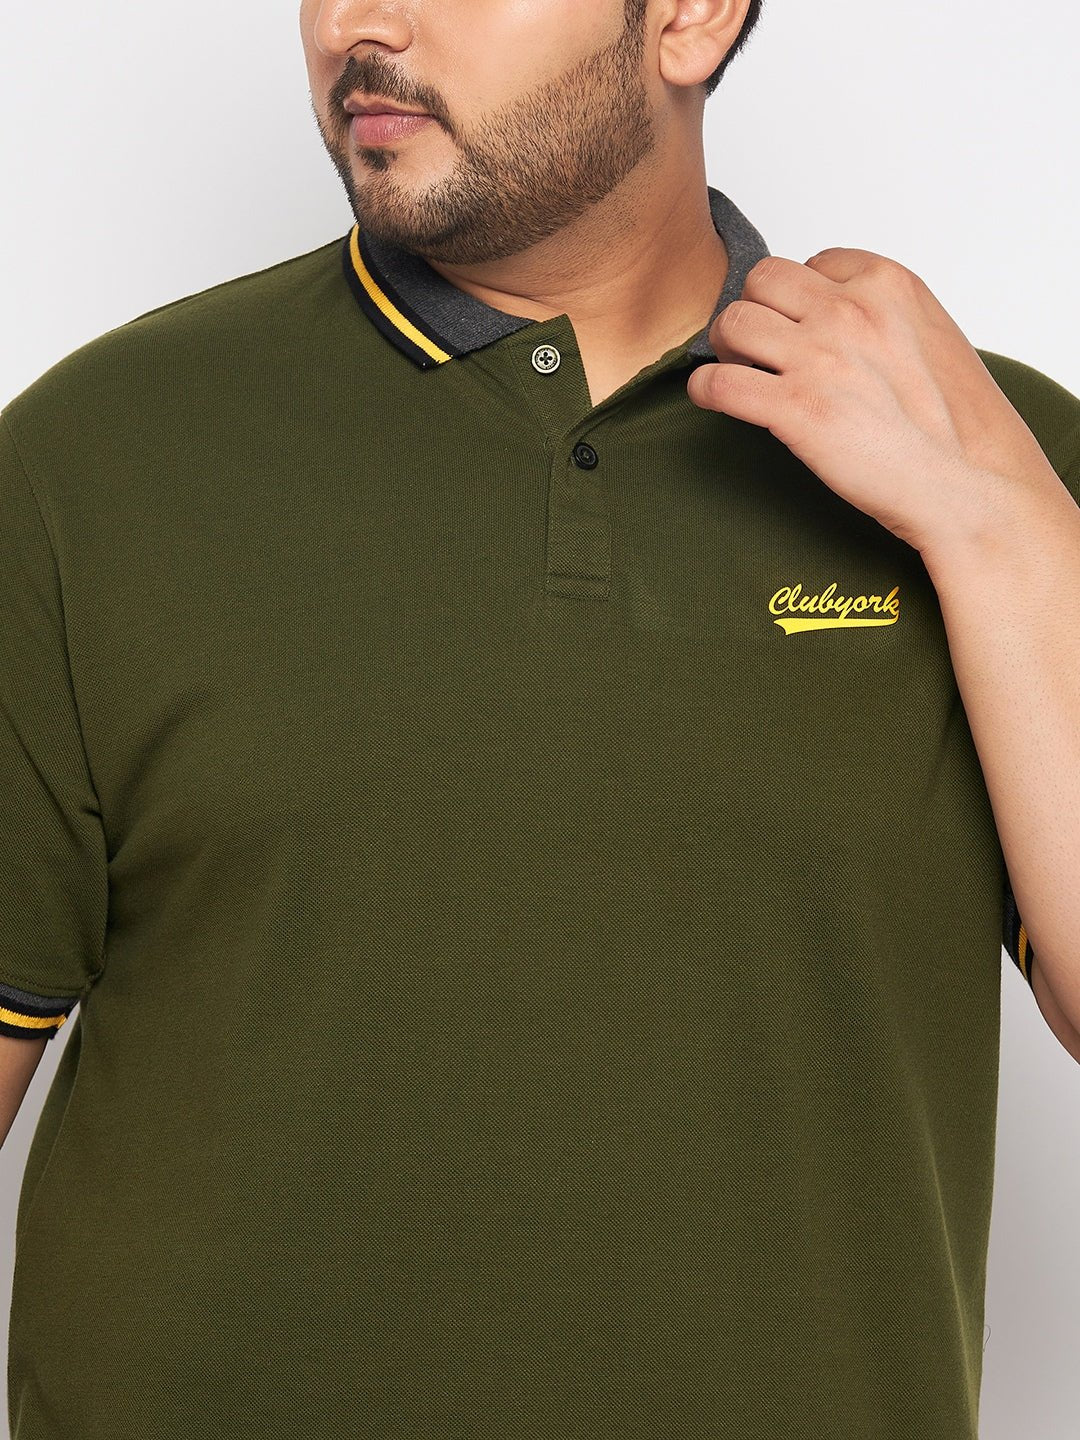 Plus Size Olive Polo T-Shirt - clubyork